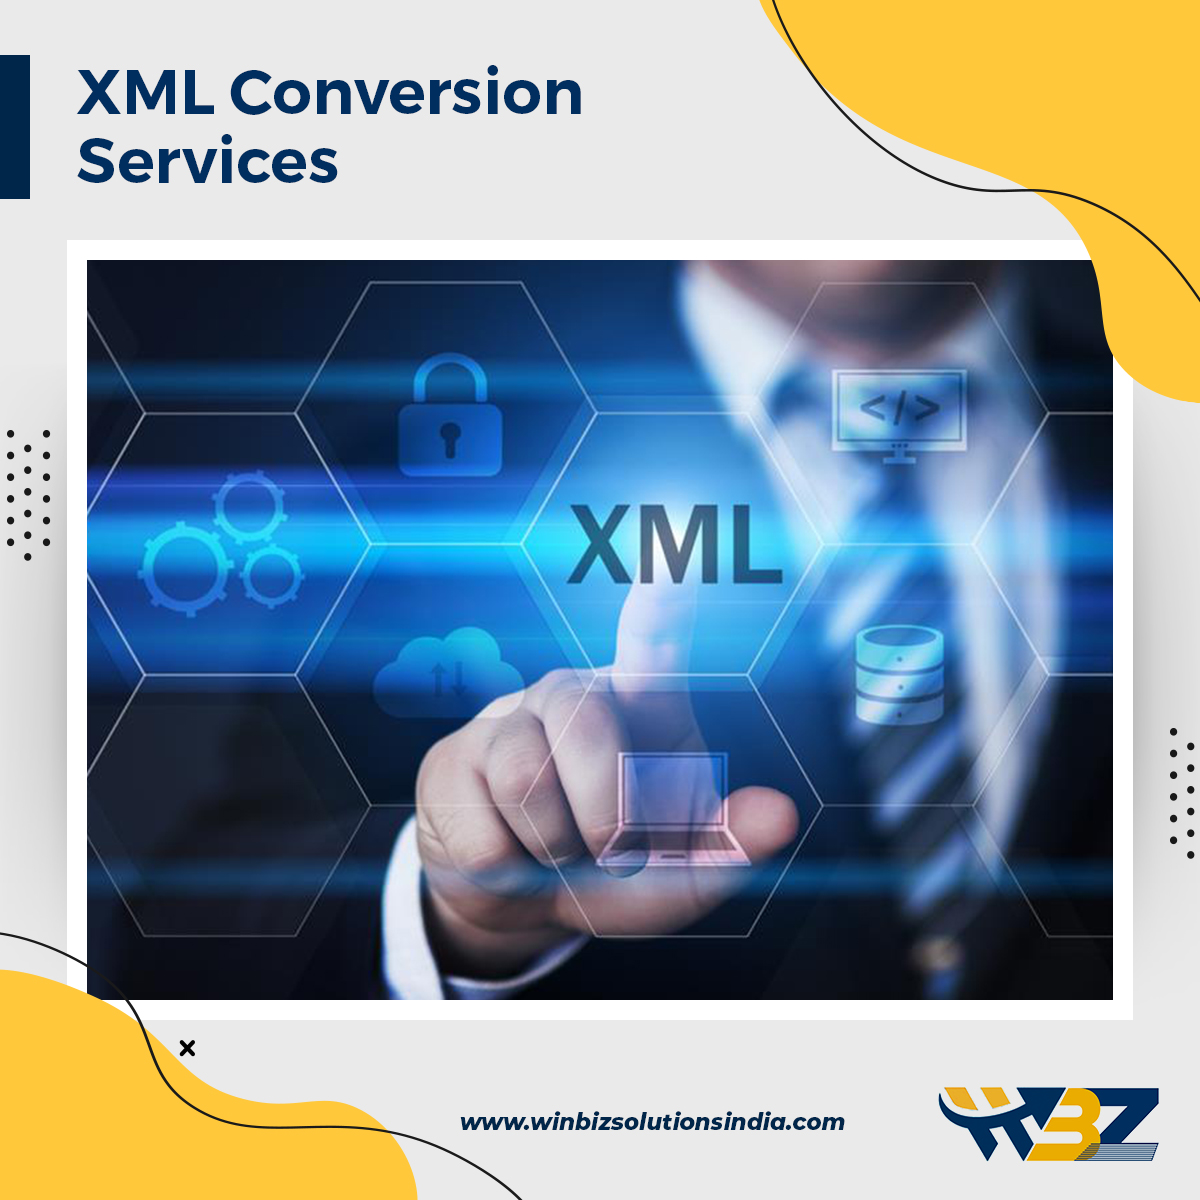 Need to convert your documents into XML formats? Let our certified document conversion specialists help you with it. Employ our XML conversion services today!
bit.ly/3ok8WS9
#xmlformat #XML #digitalconversion